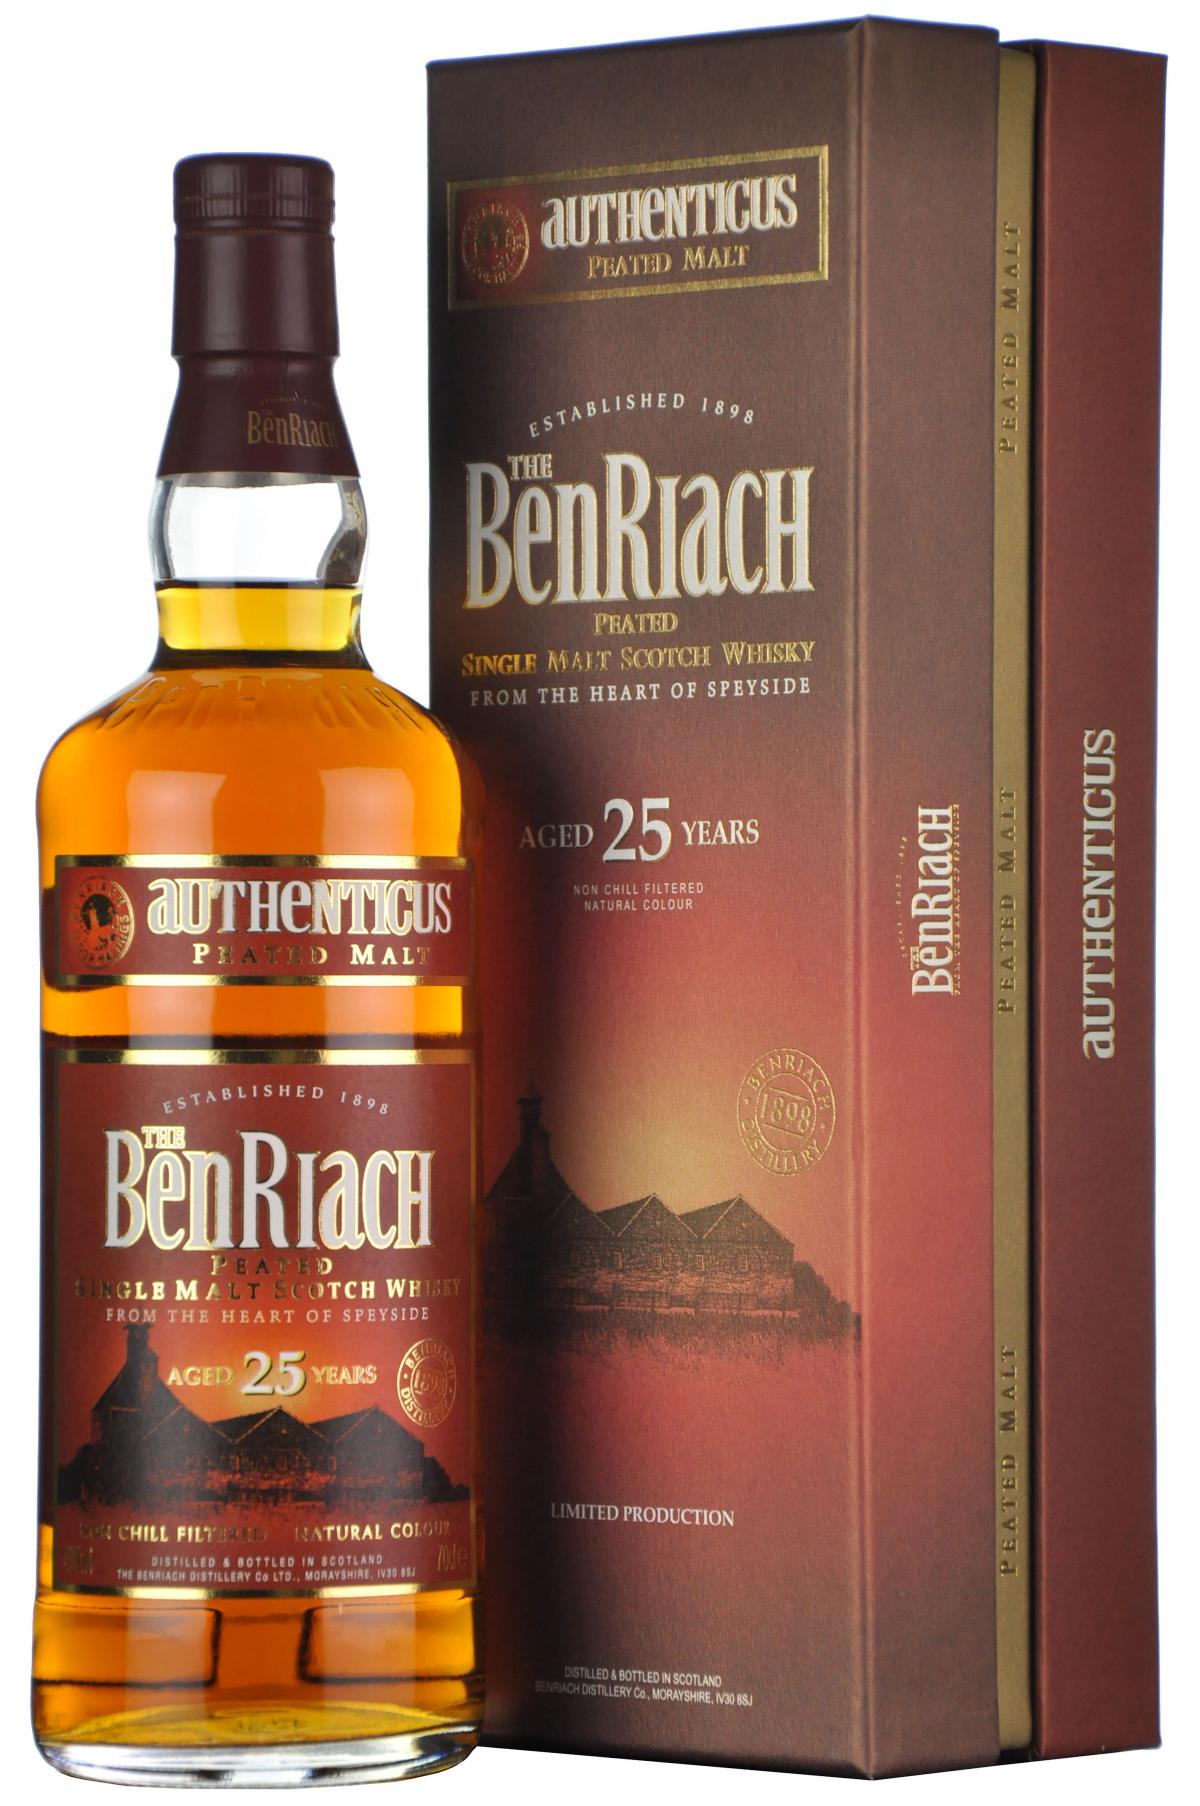 benriach 25 year old, authenticus peated, speyside single malt scotch whisky